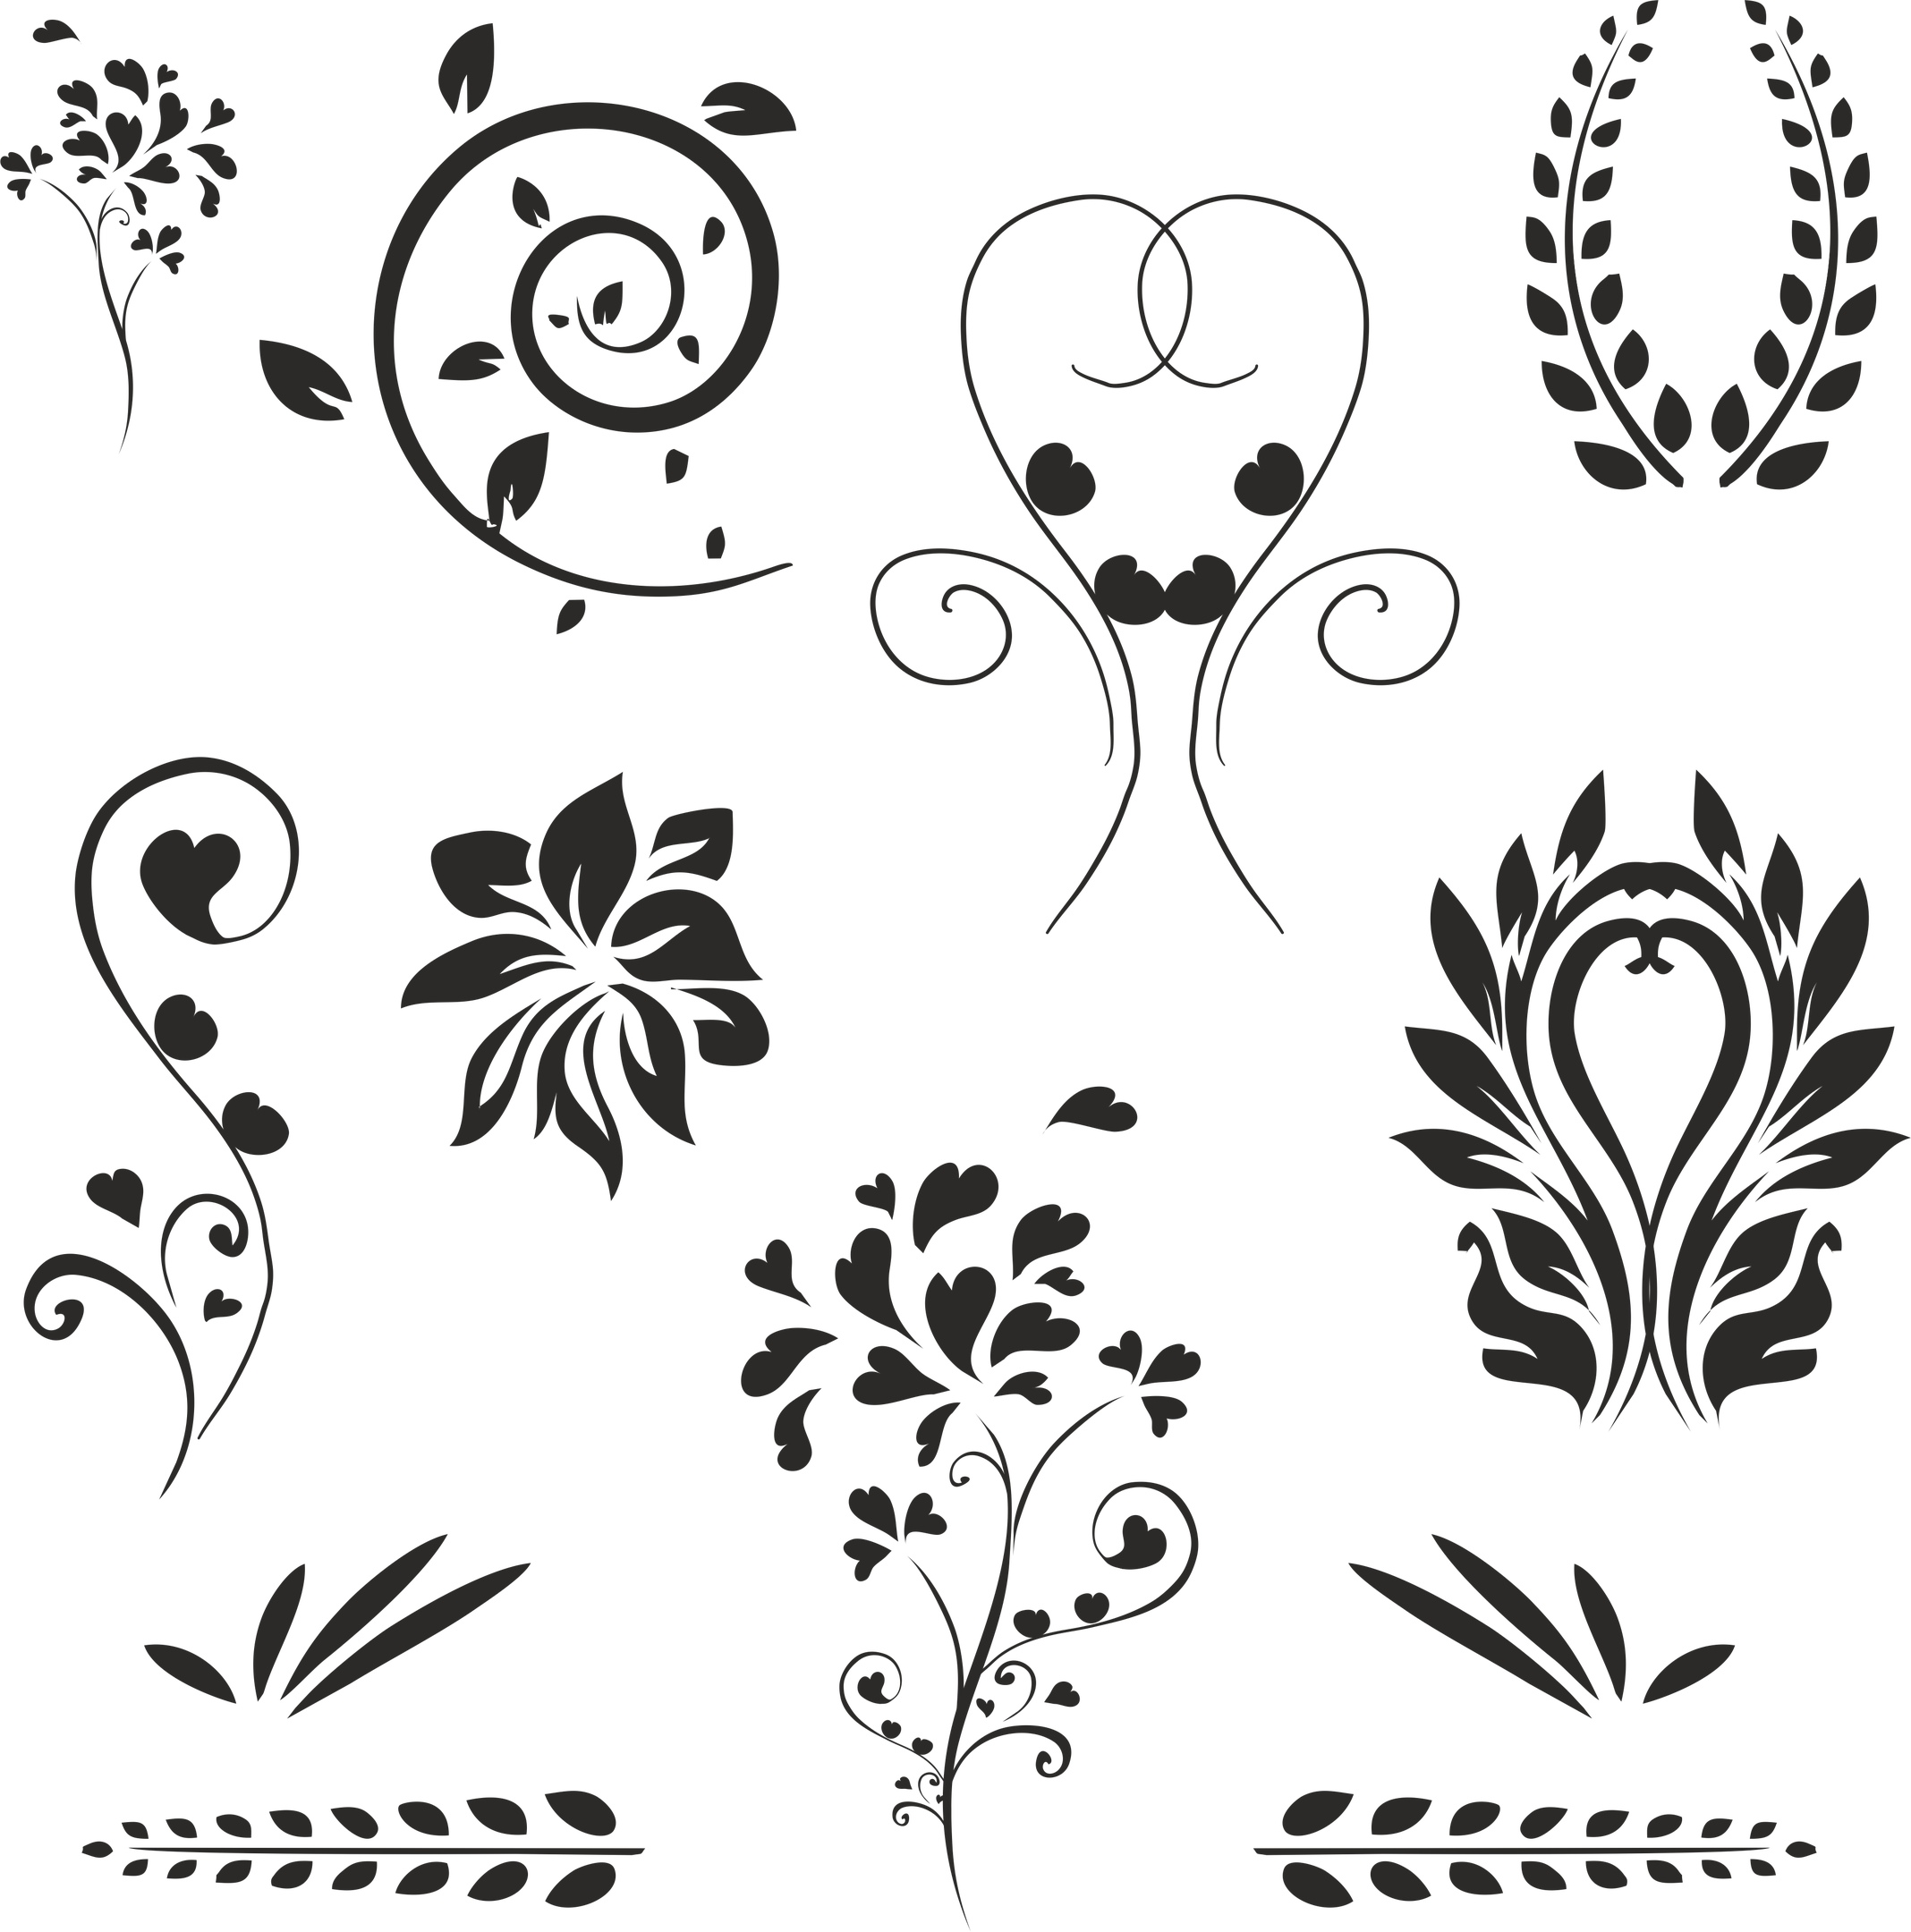 Floral Decoration Set Free Vector cdr Download - 3axis.co